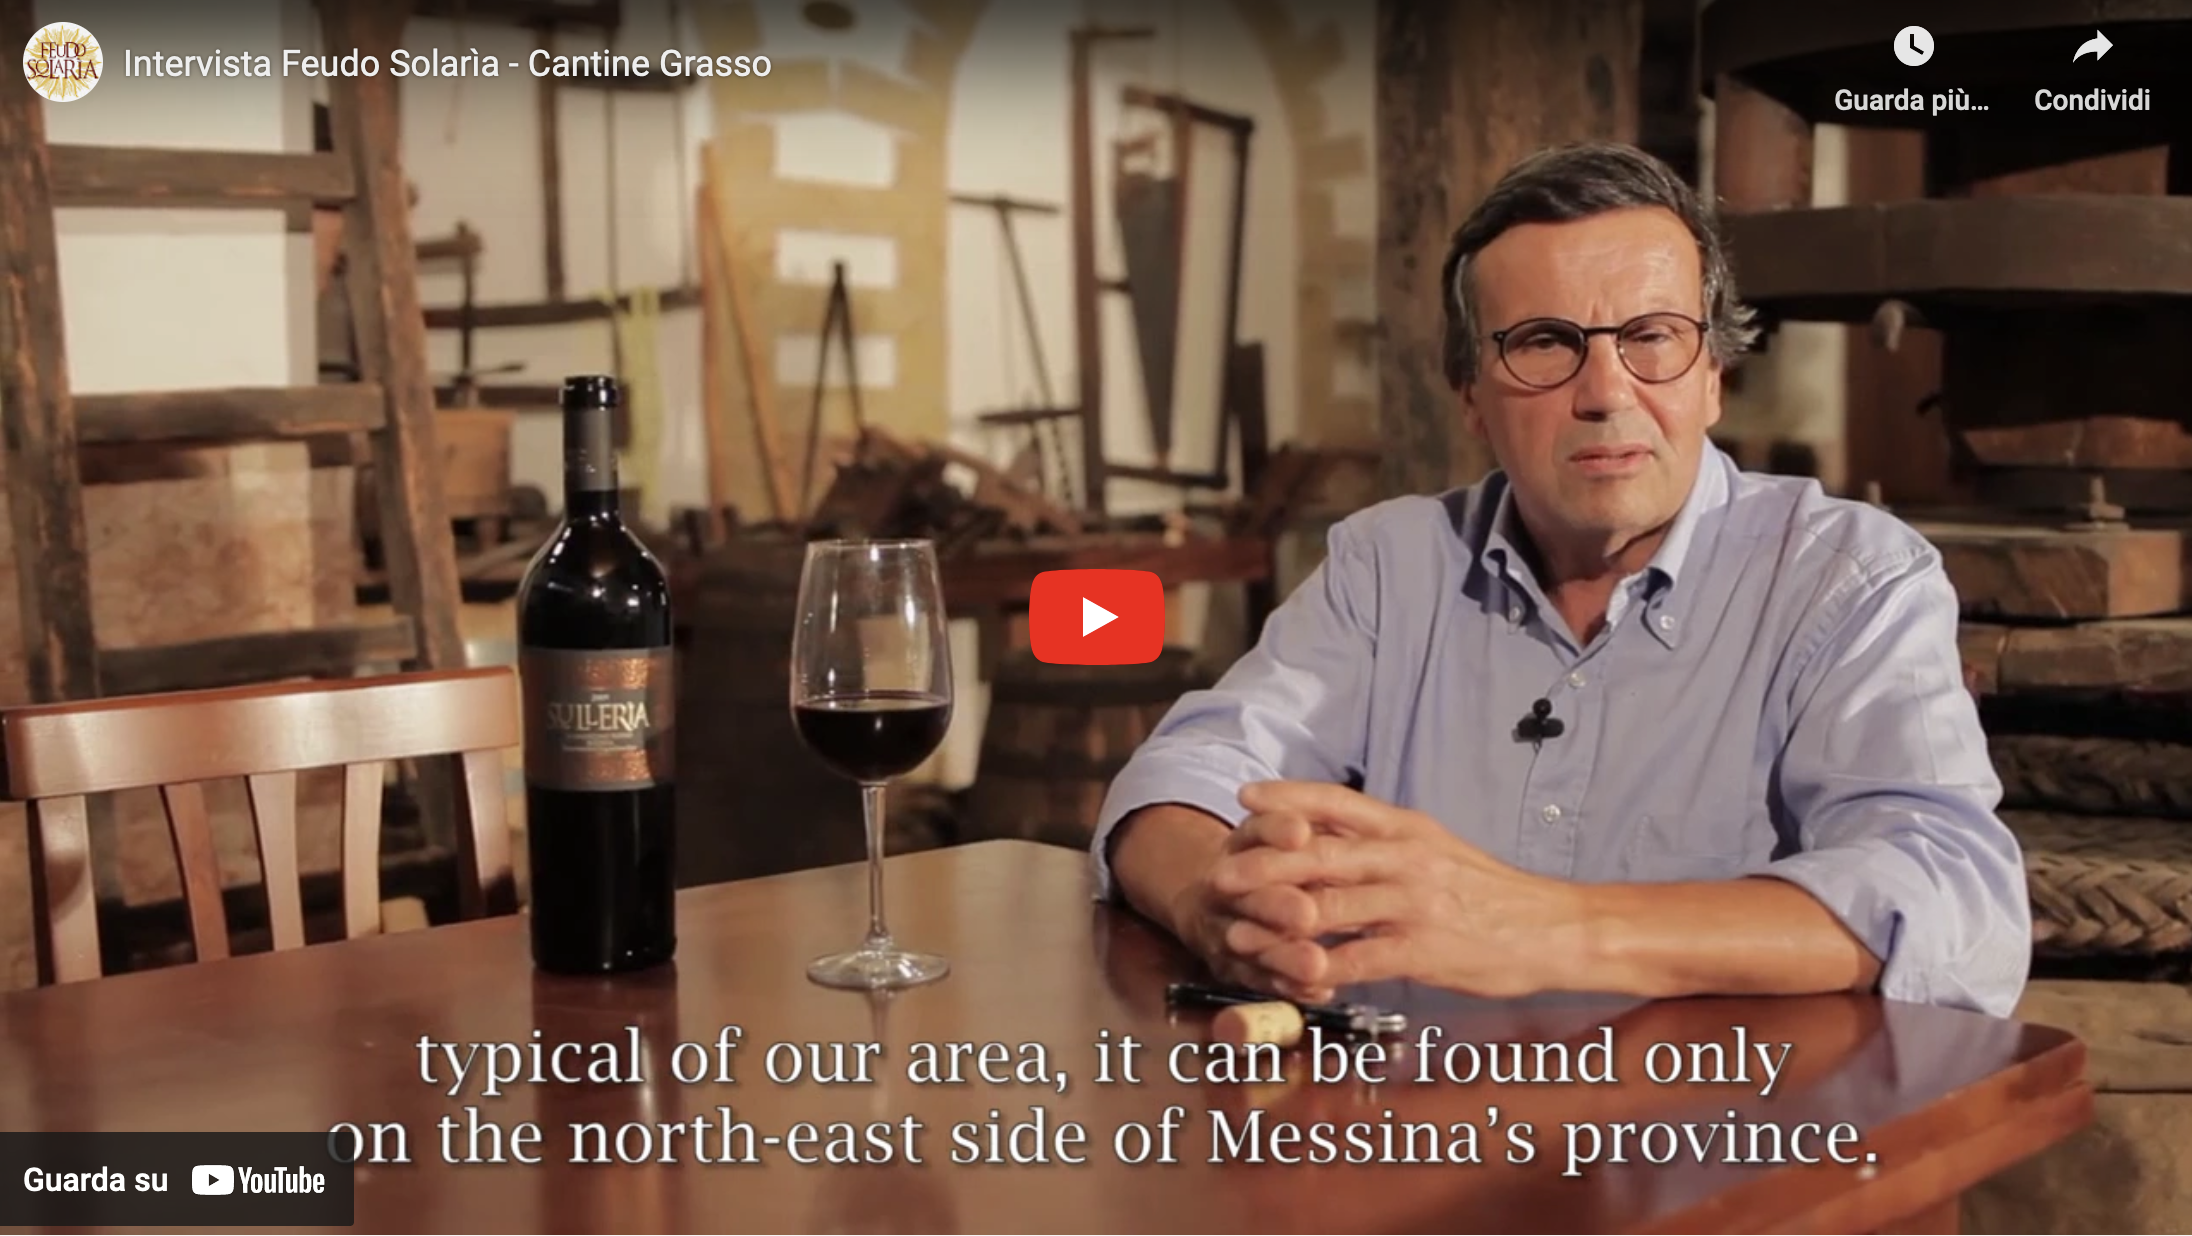 Load video: Interview with Cantine Grasso